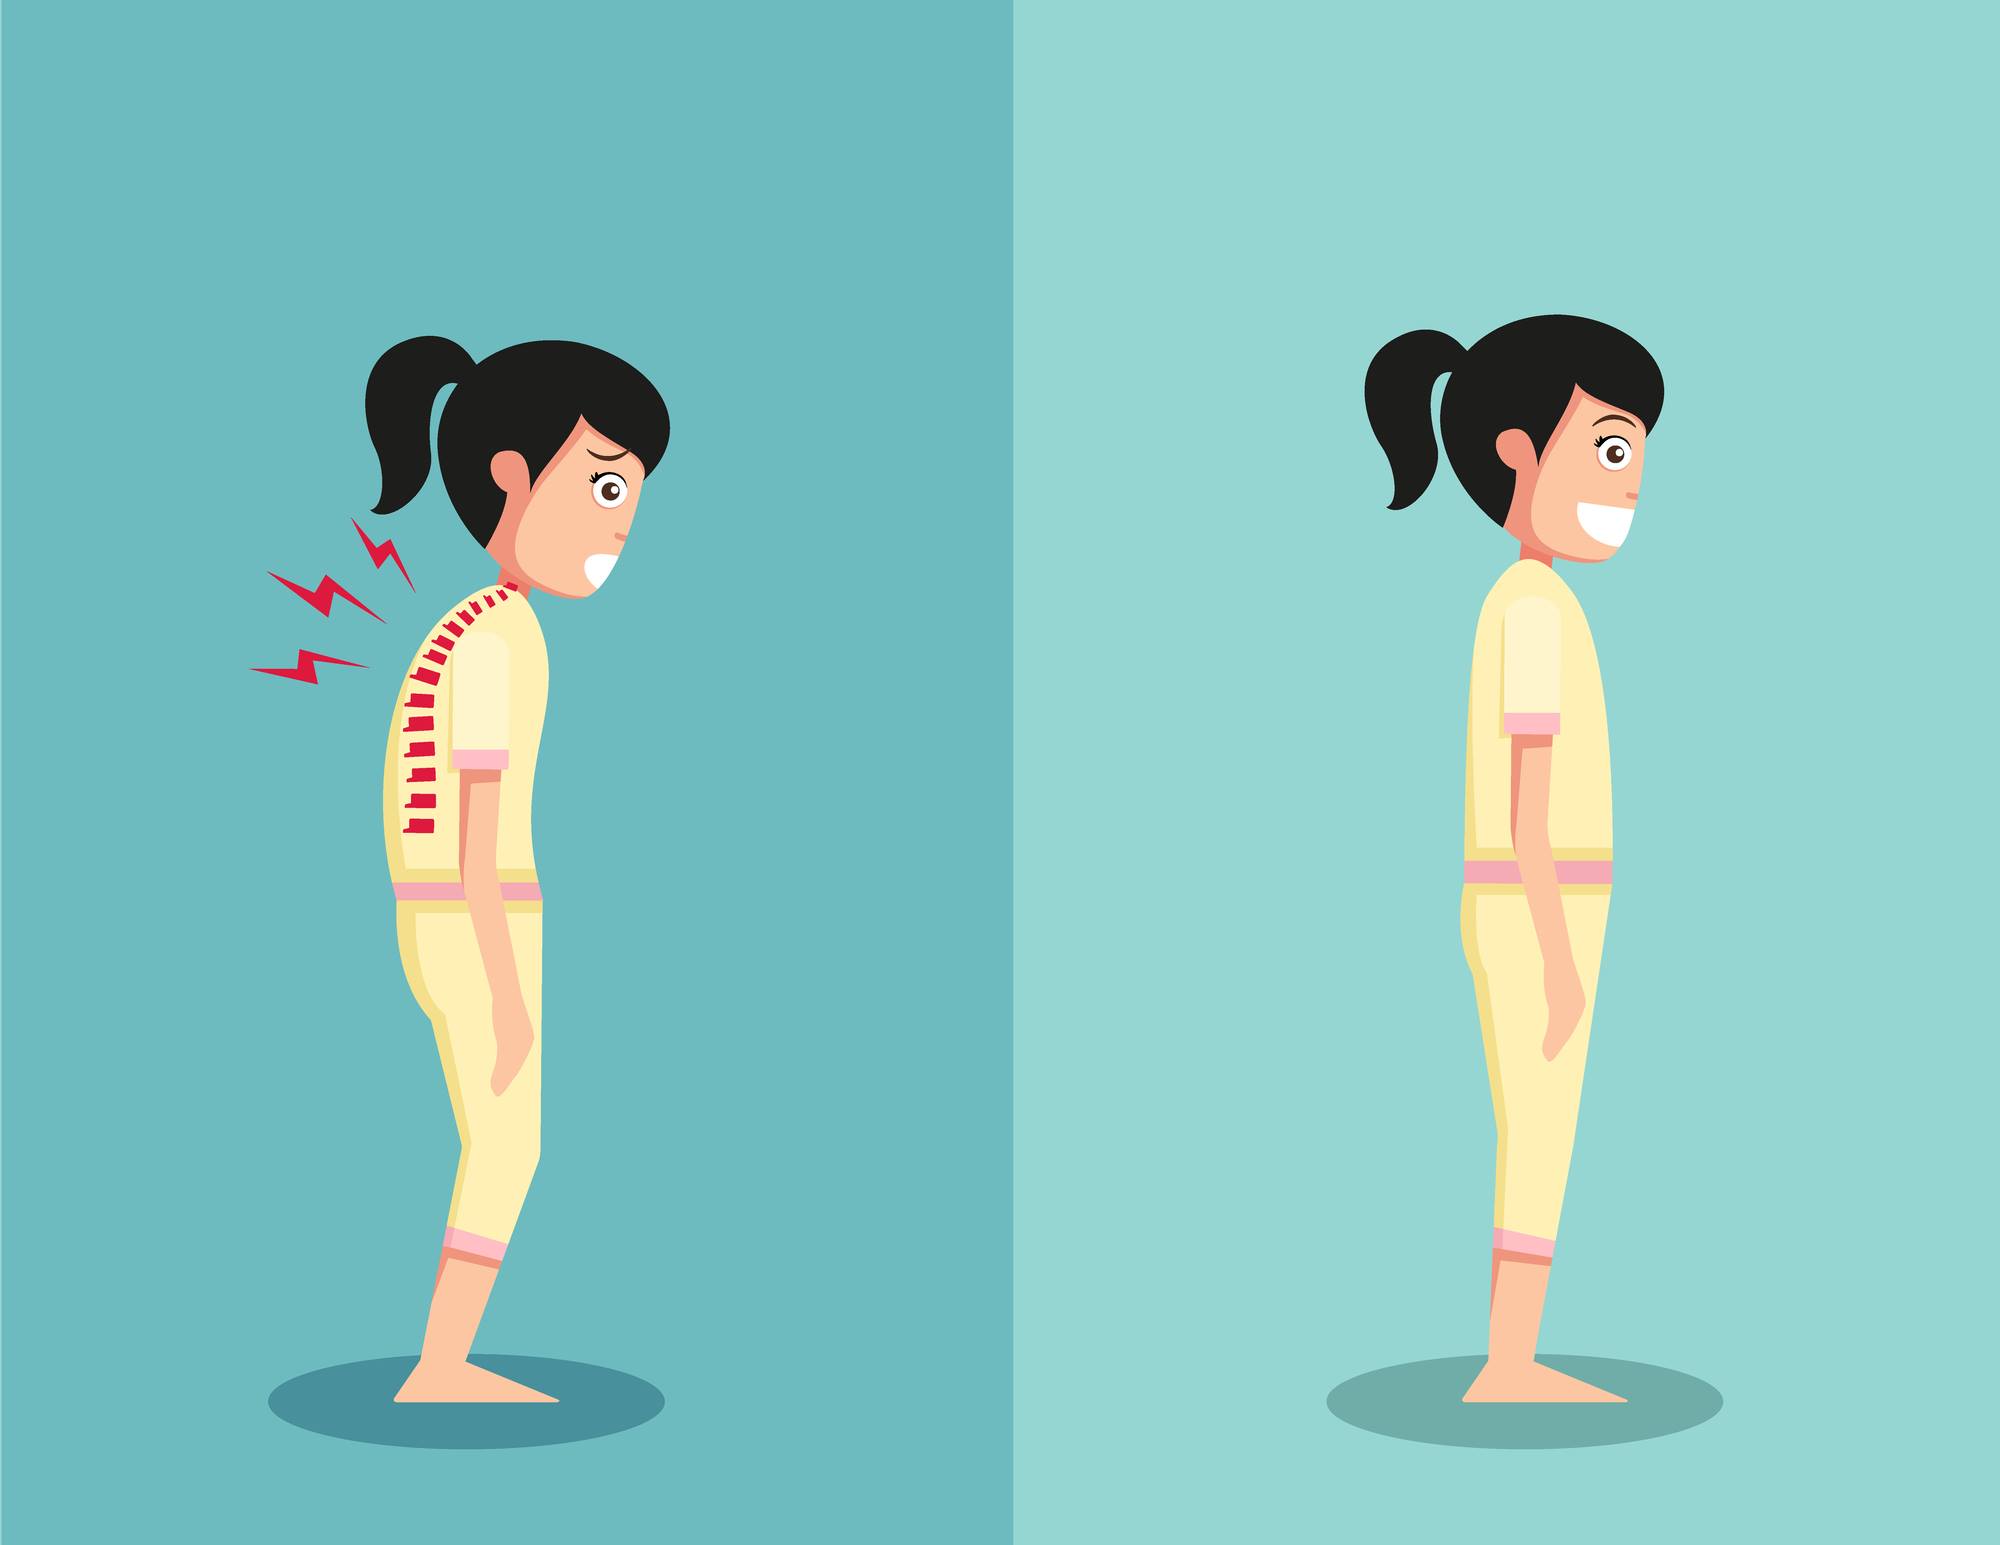 Cartoon drawing of a girl standing with her back bent forward and then the same girl standing with her back straight in the correct posture.